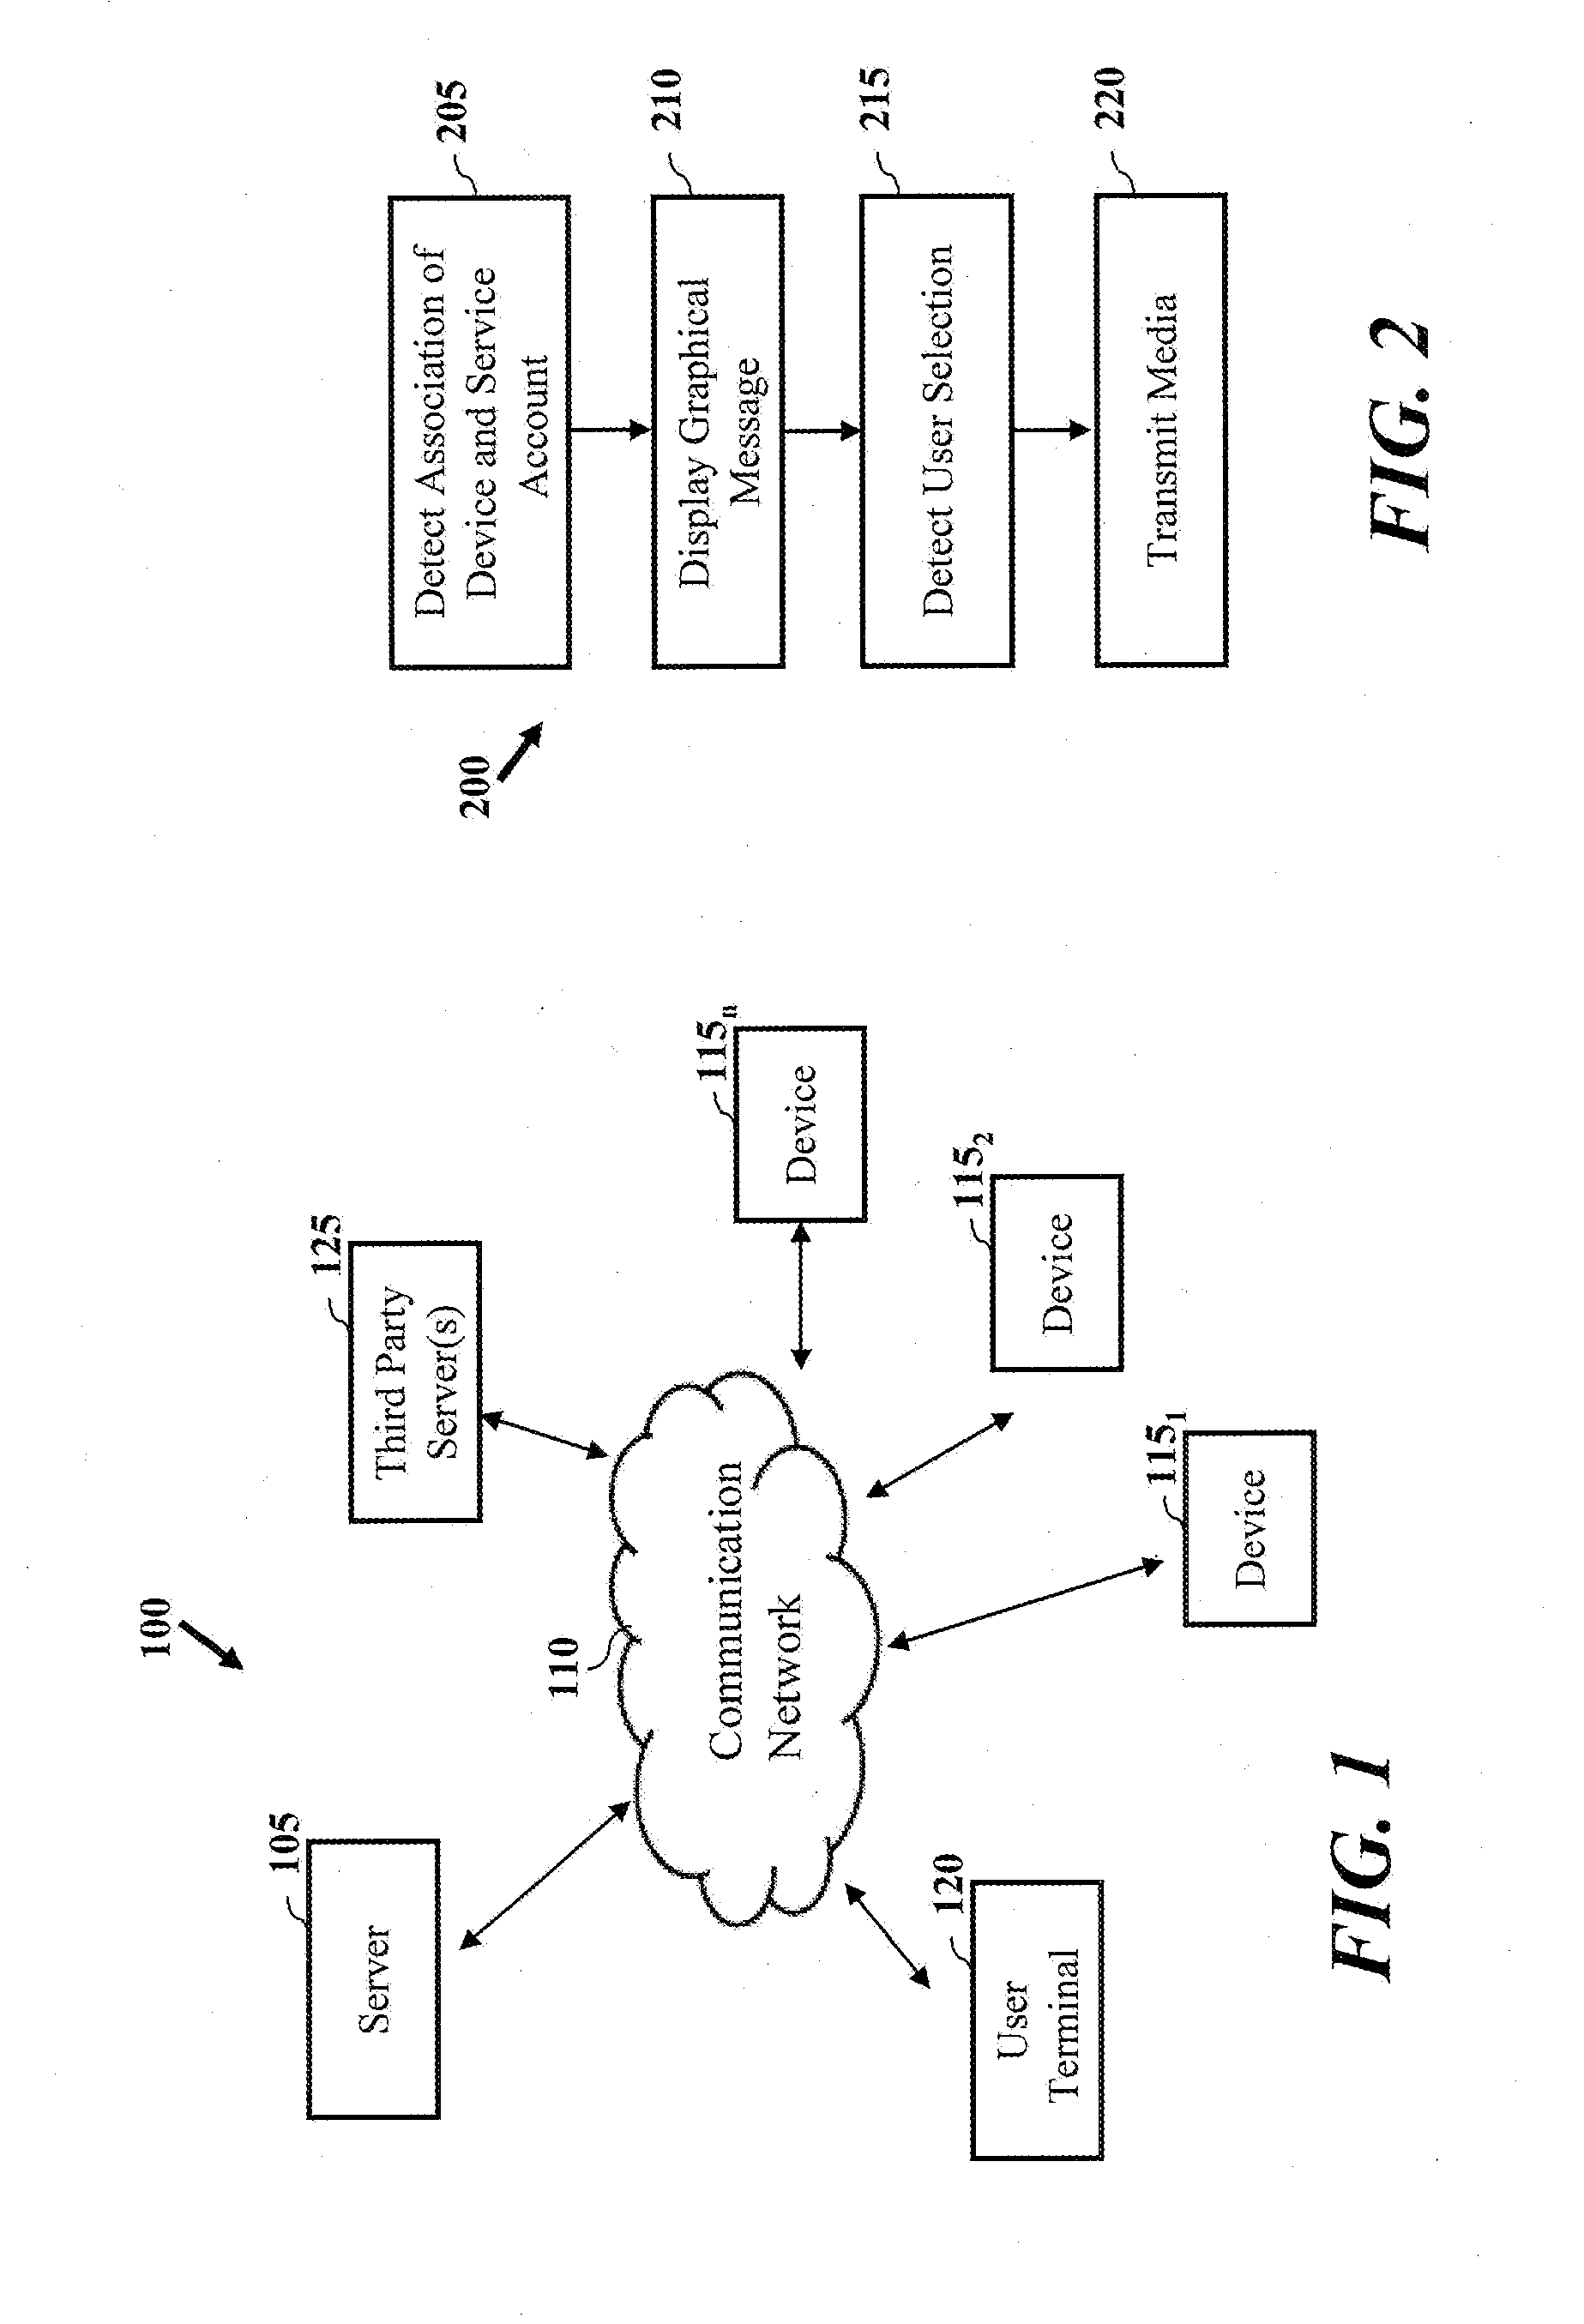 Managing device connectivity and network based services